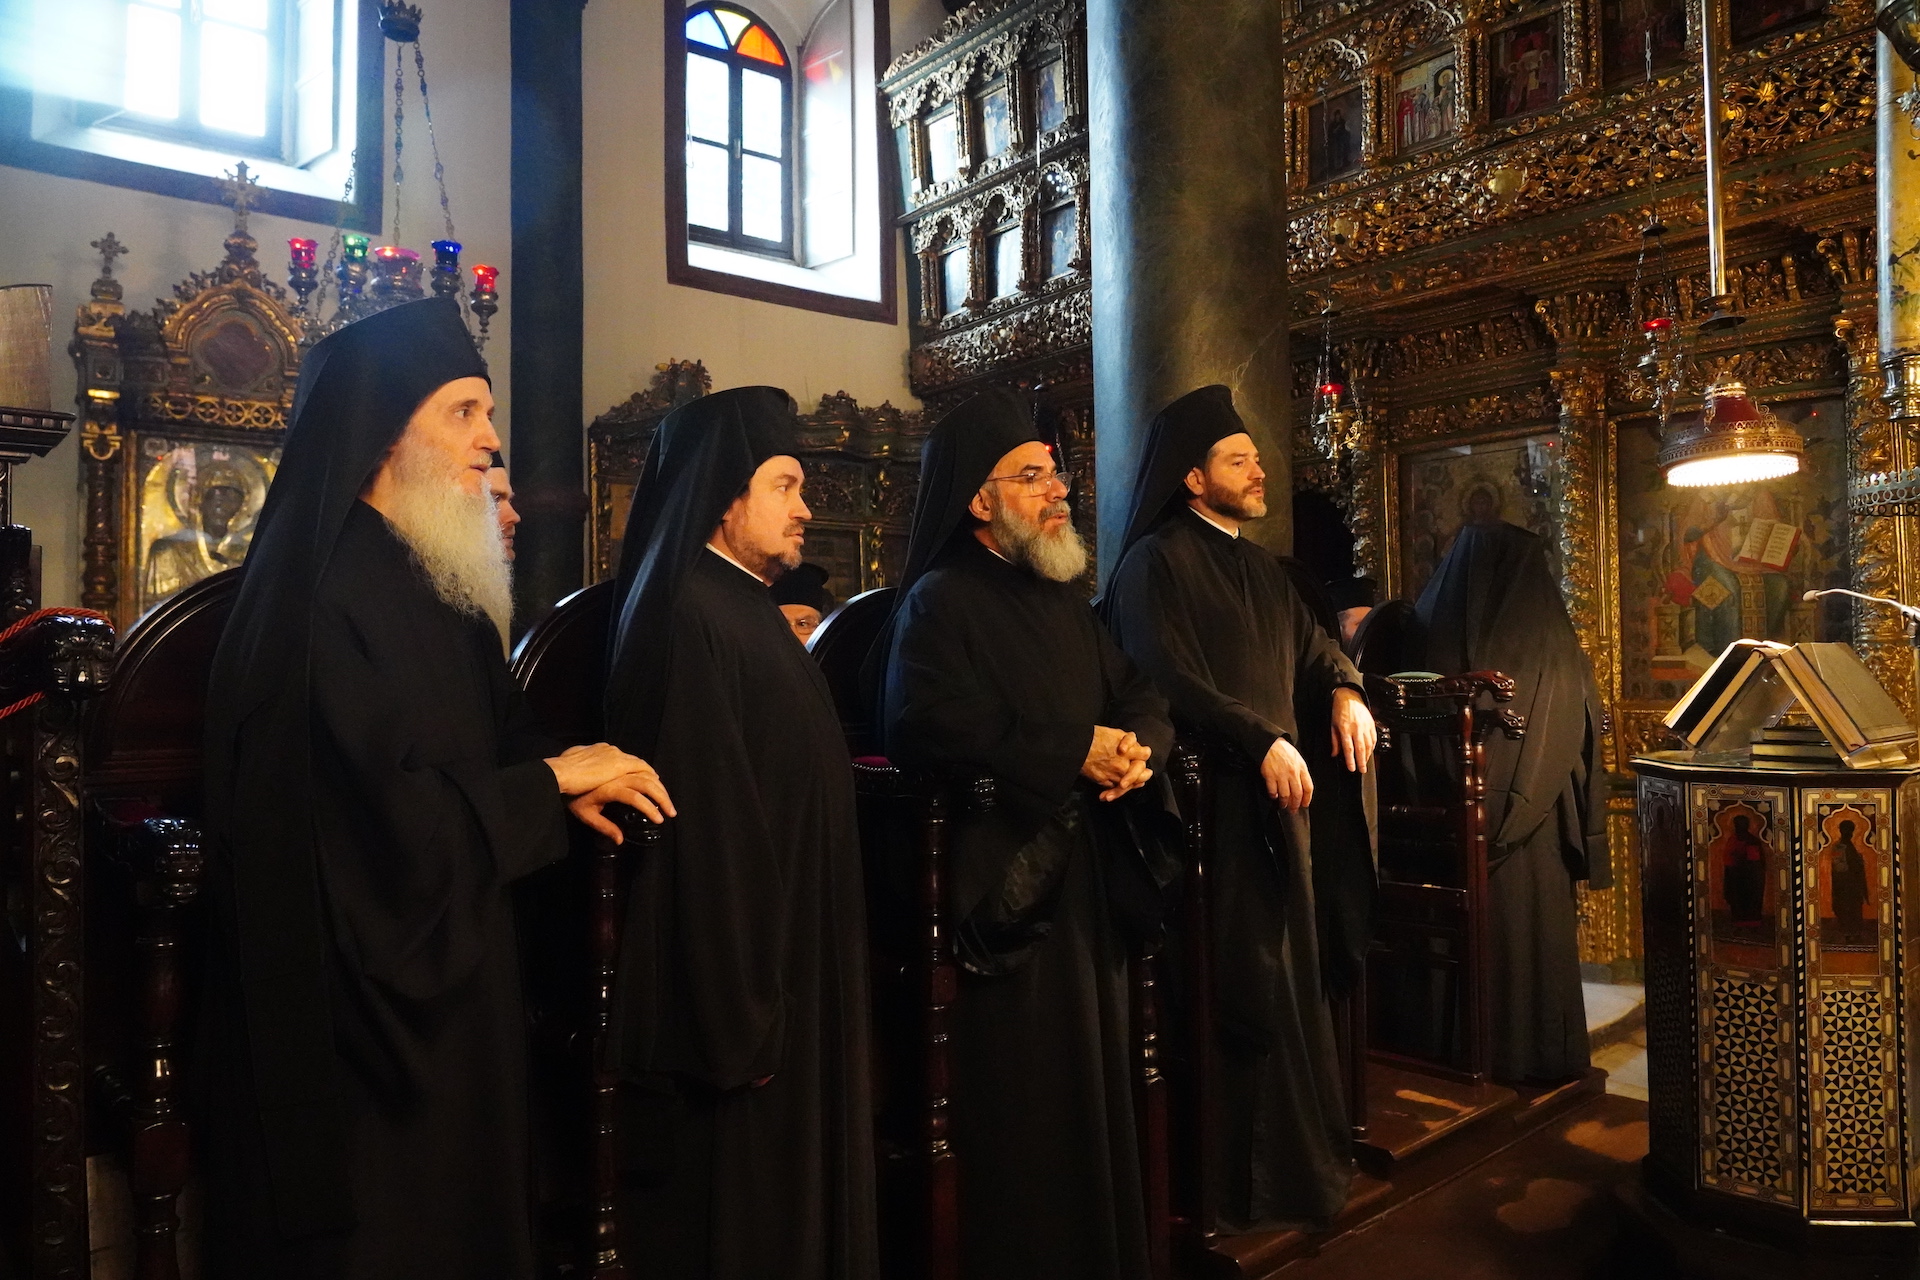 The Lesser and Greater Minima (Announcement) of the new Metropolitan Iakovos of Mexico